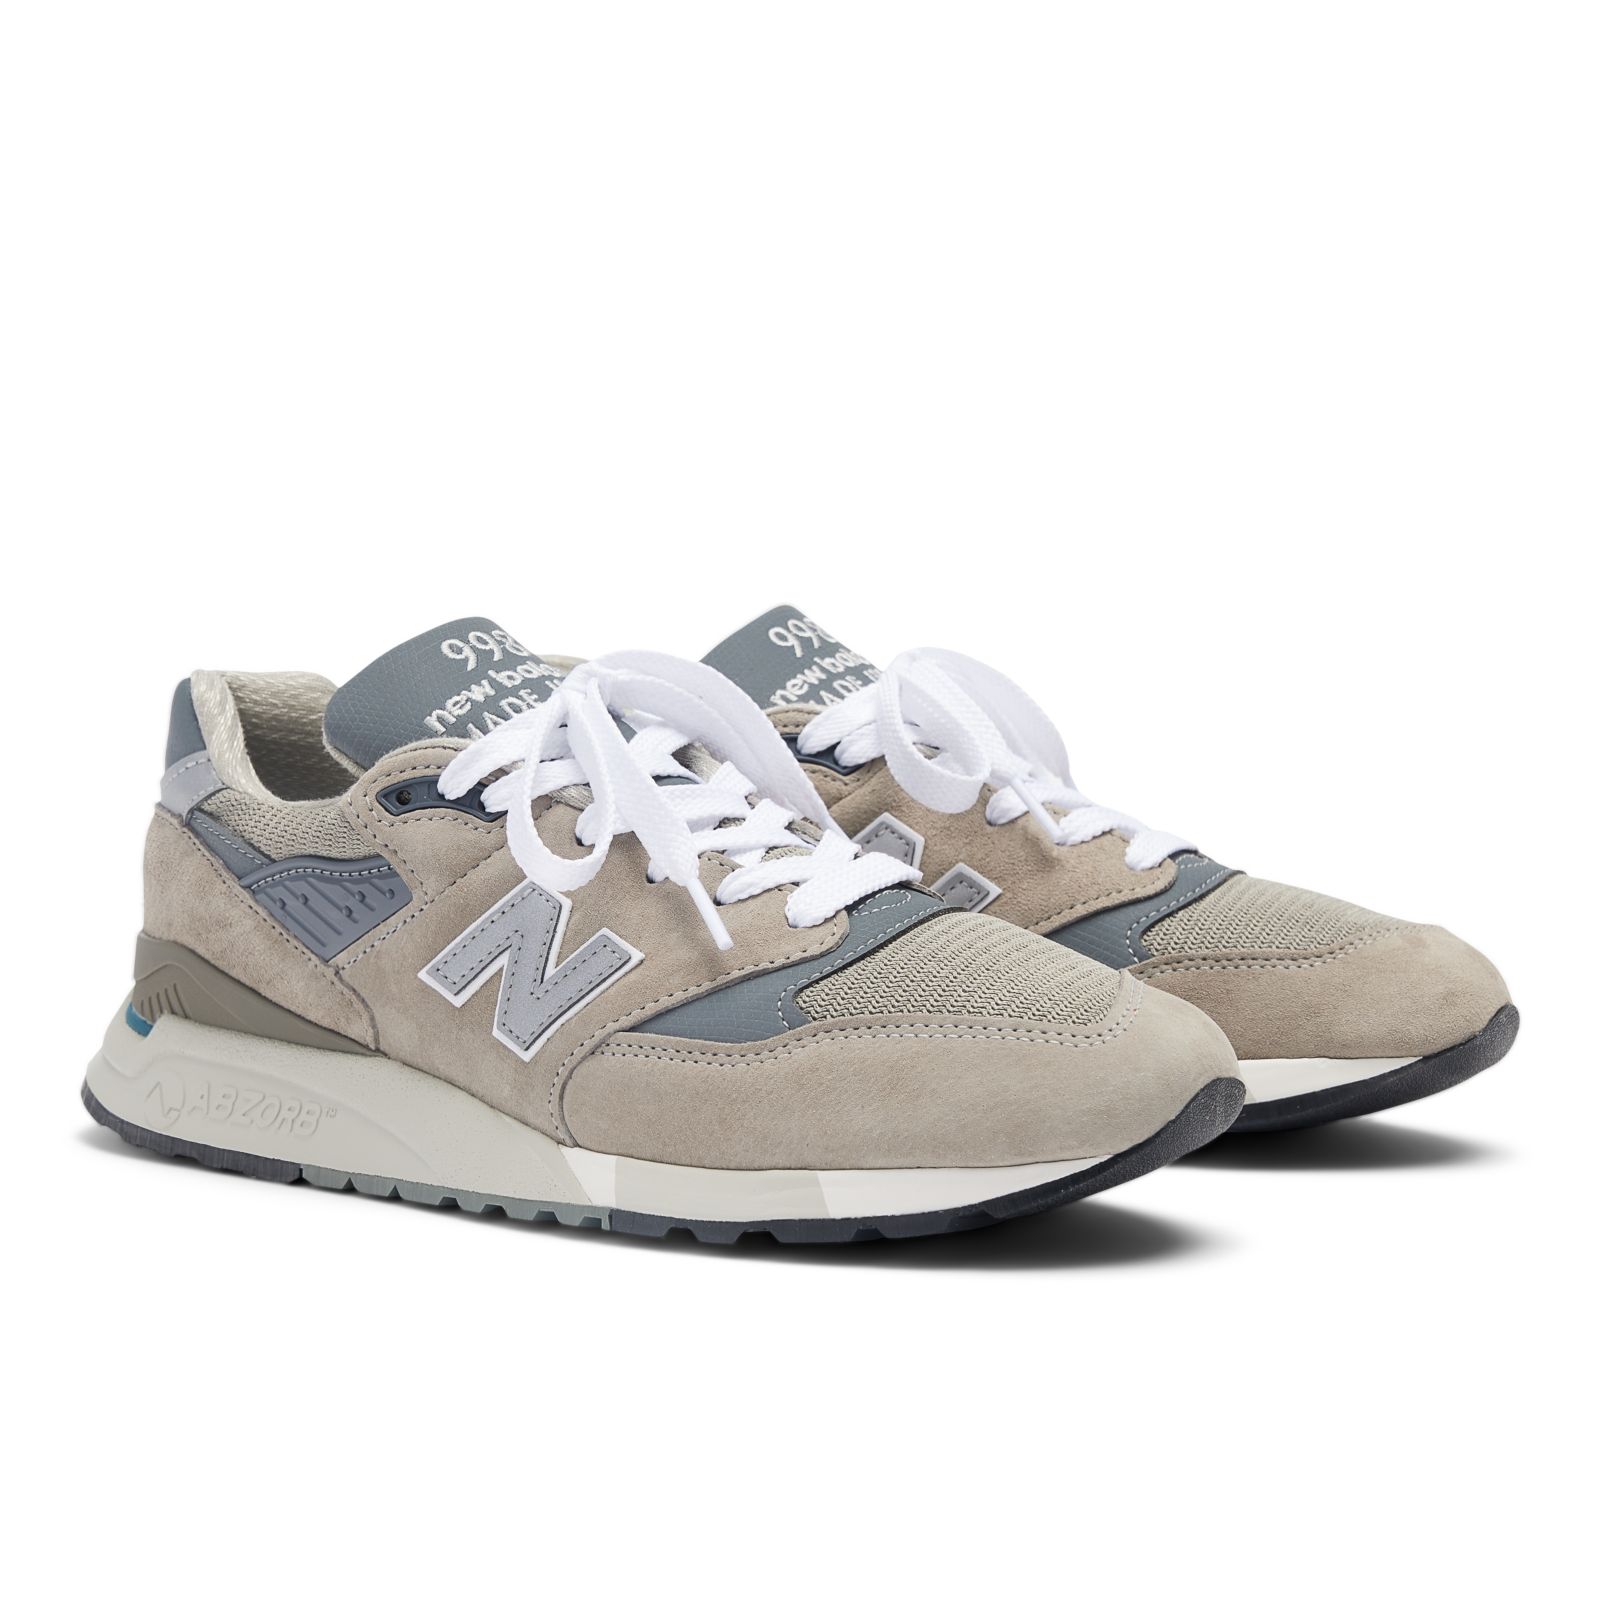 Made in 998 - New Balance